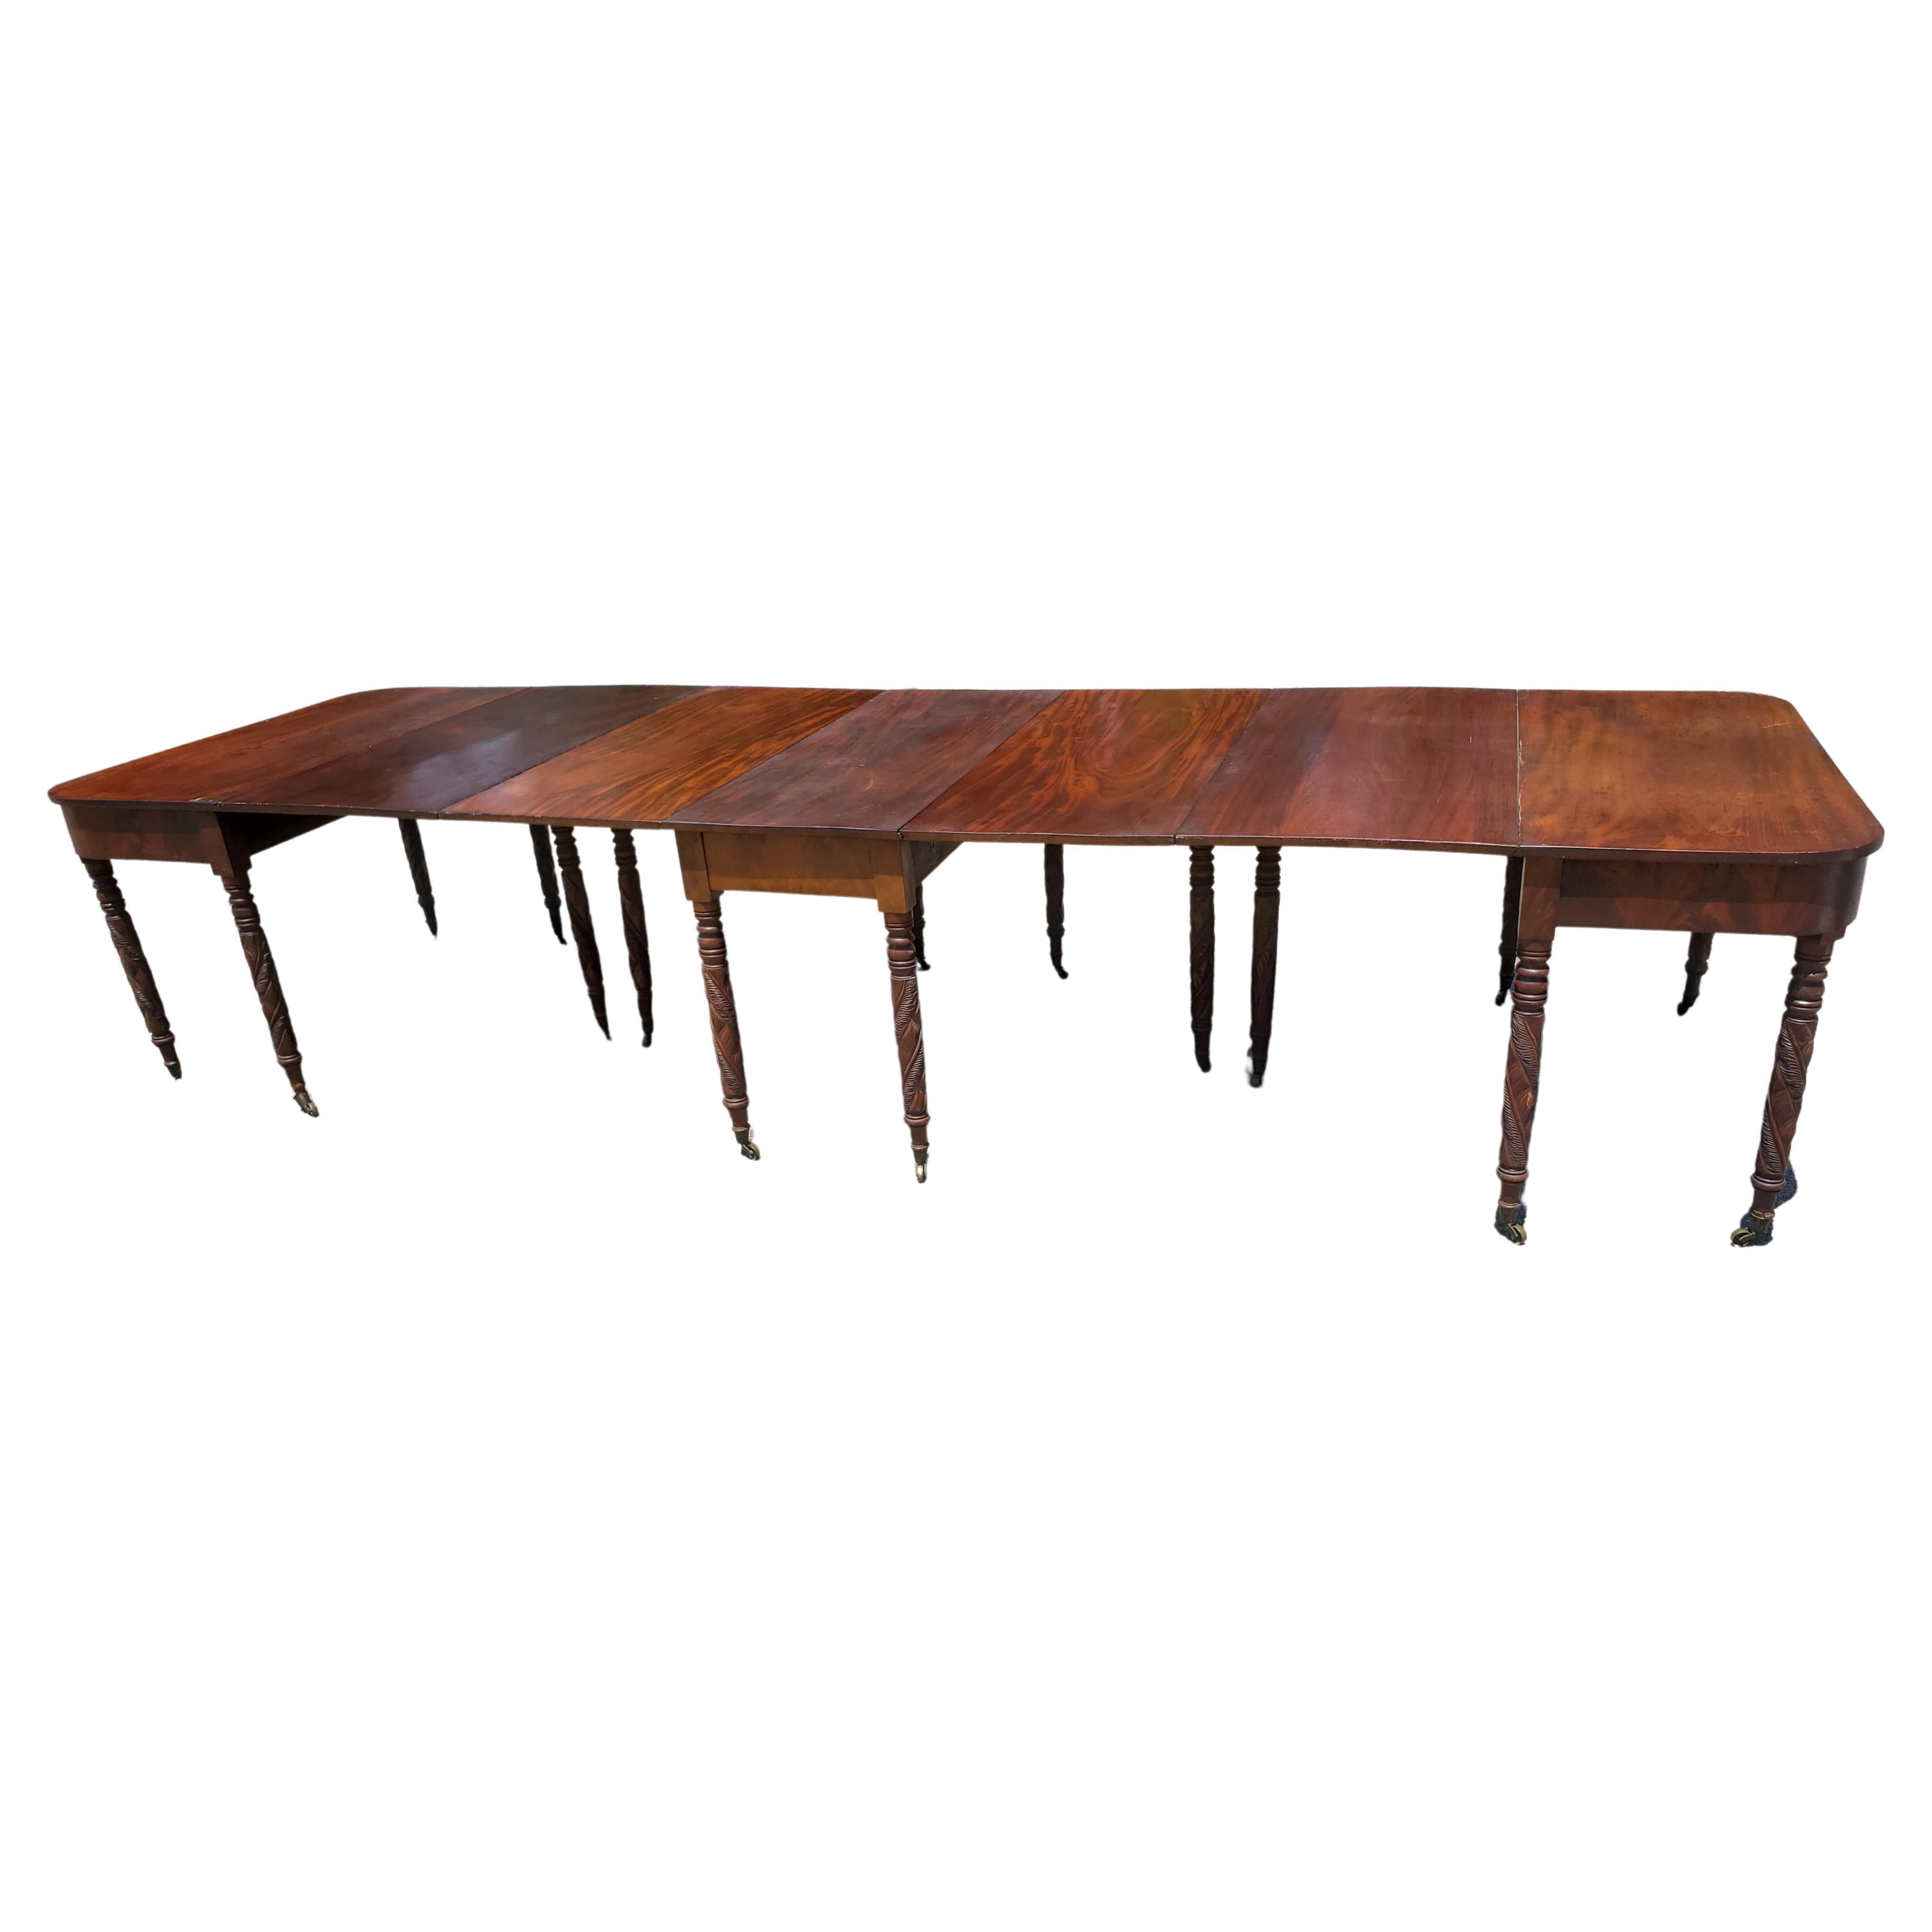 Grand Federal / Hepplewhite Ribbon Mahogany Three-Part Dining Table, 1800s For Sale 8